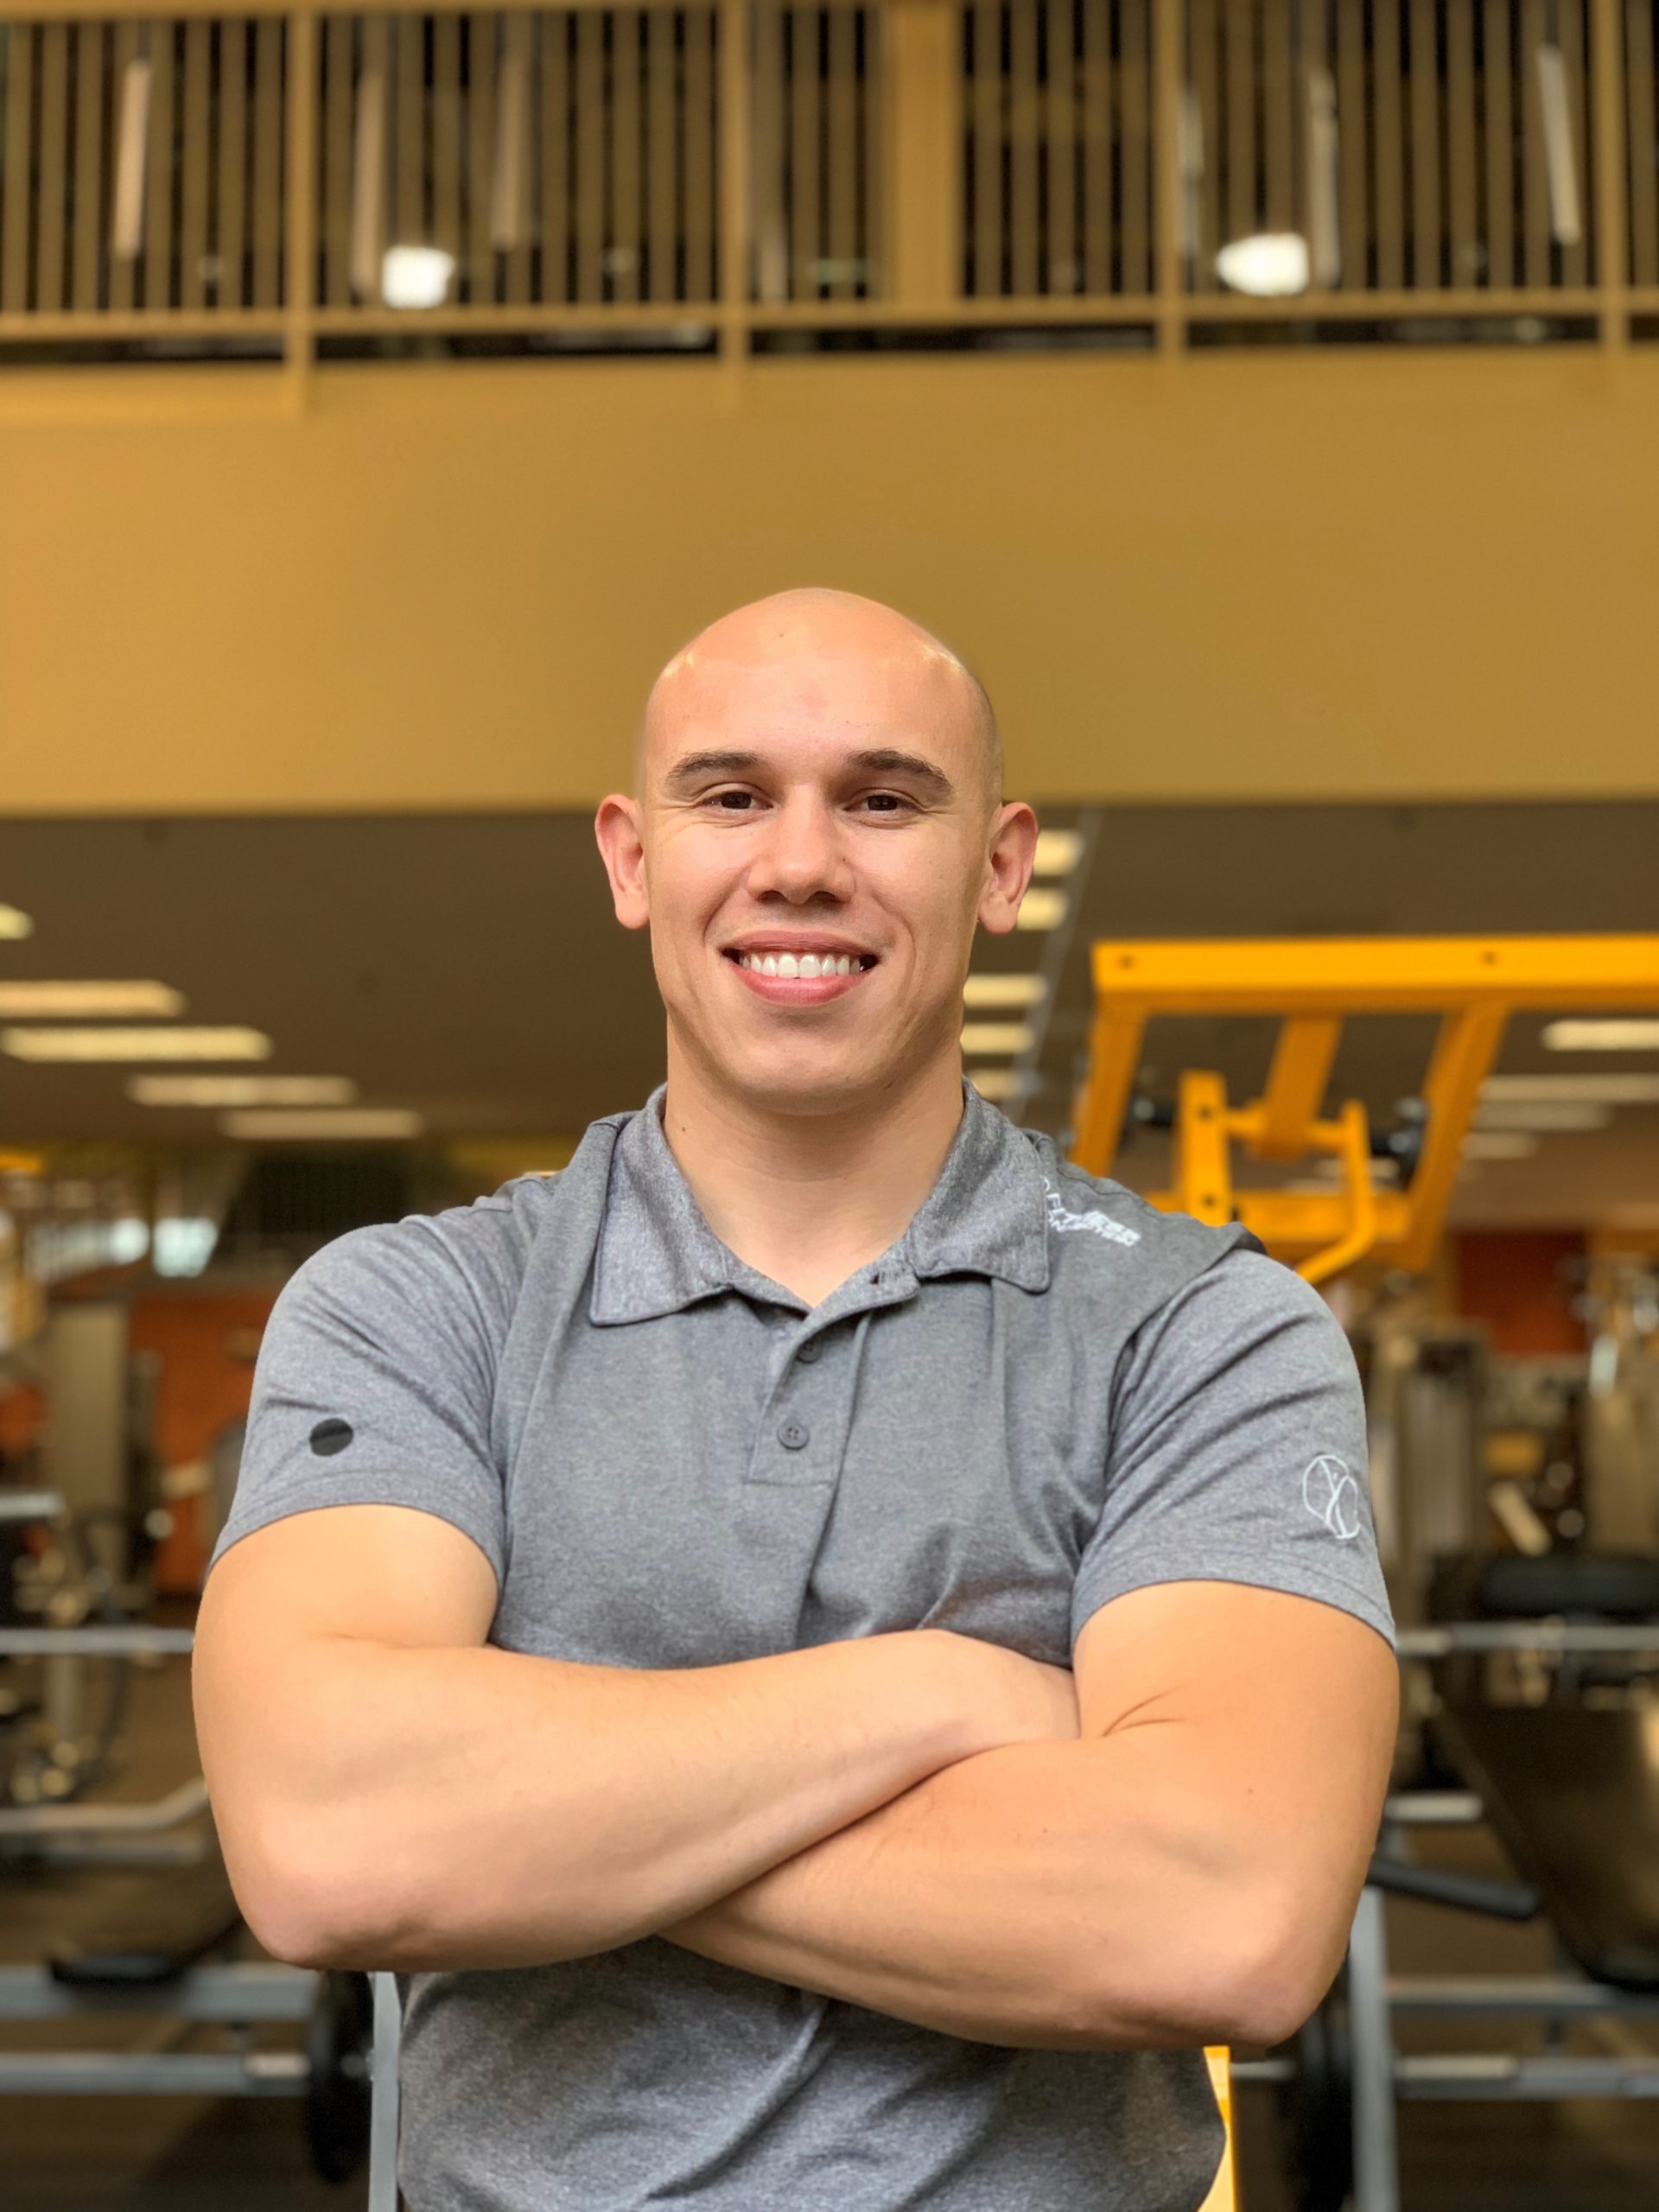 James St. John is the club manager for Fitness Connection Sparks